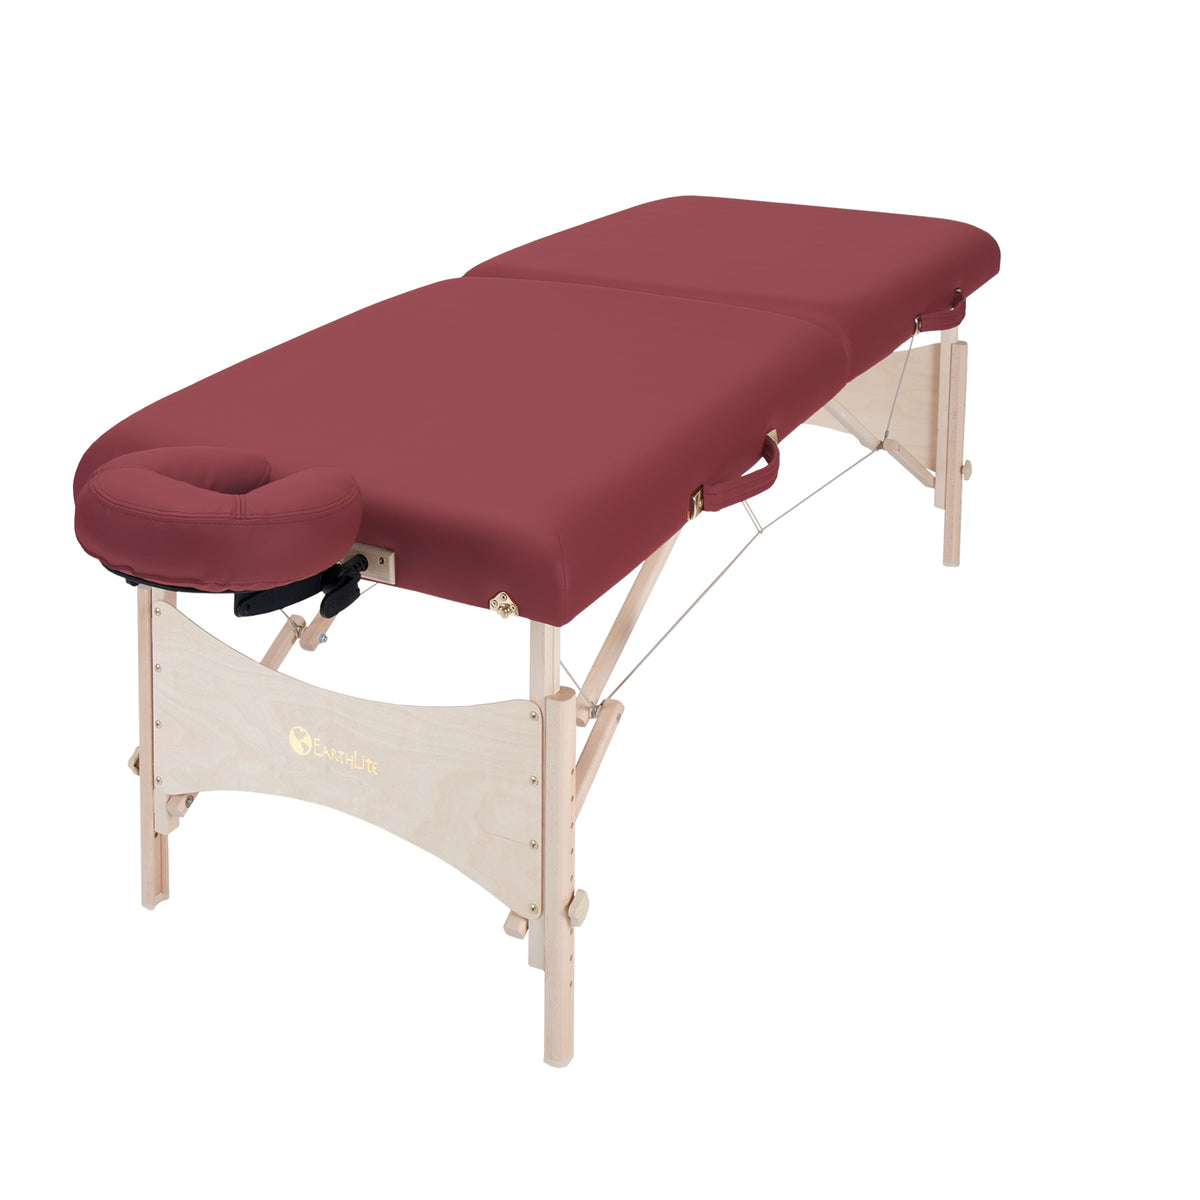 Earthlite - Harmony DX Portable Massage Table Package - Superb Massage Tables